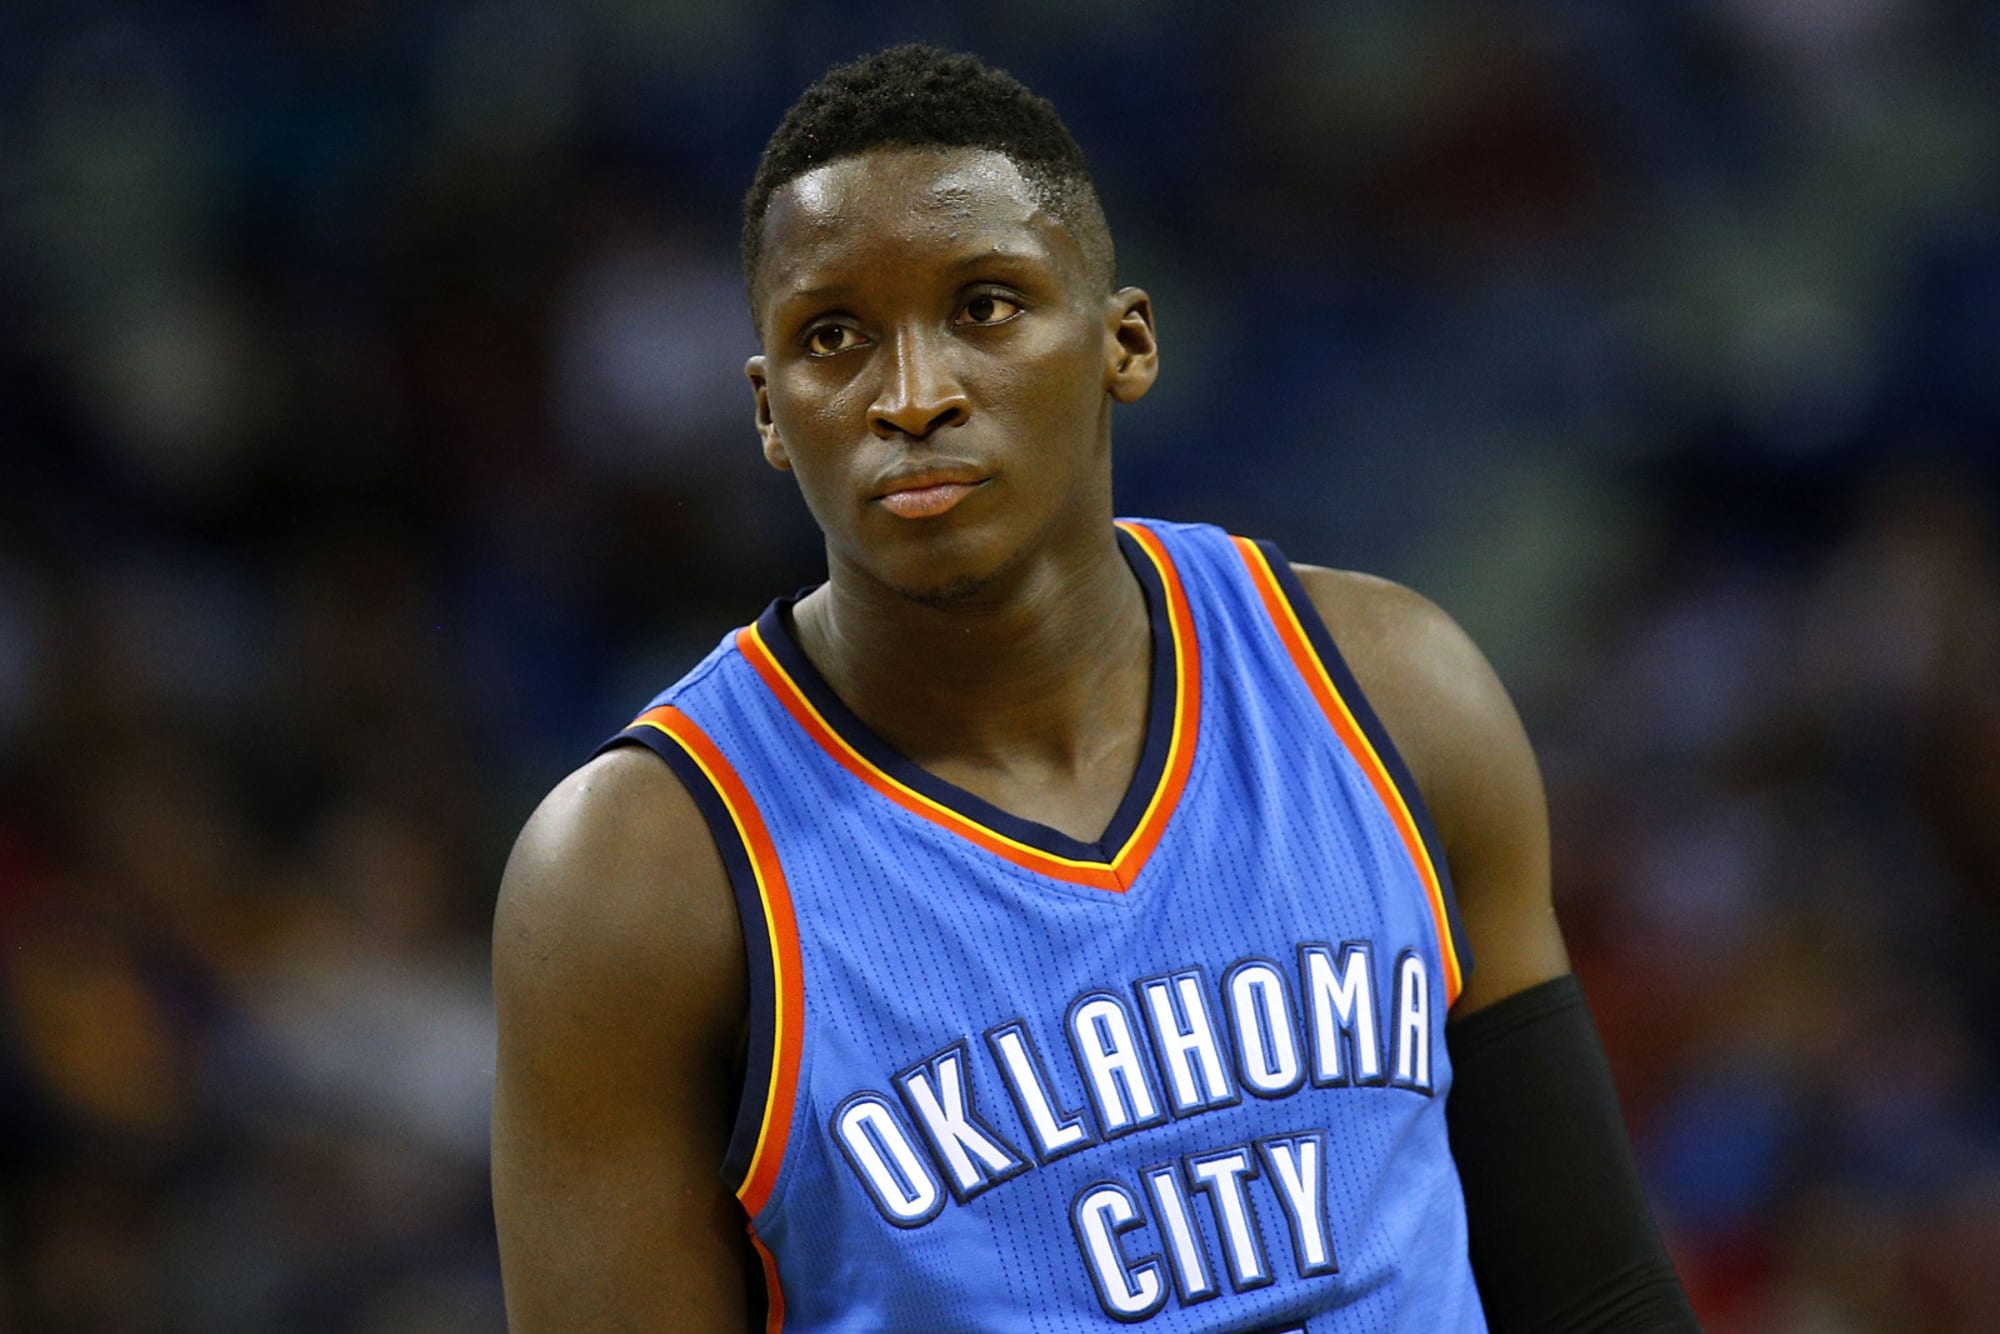 Reviewing the first tenure of Victor Oladipo in OKC